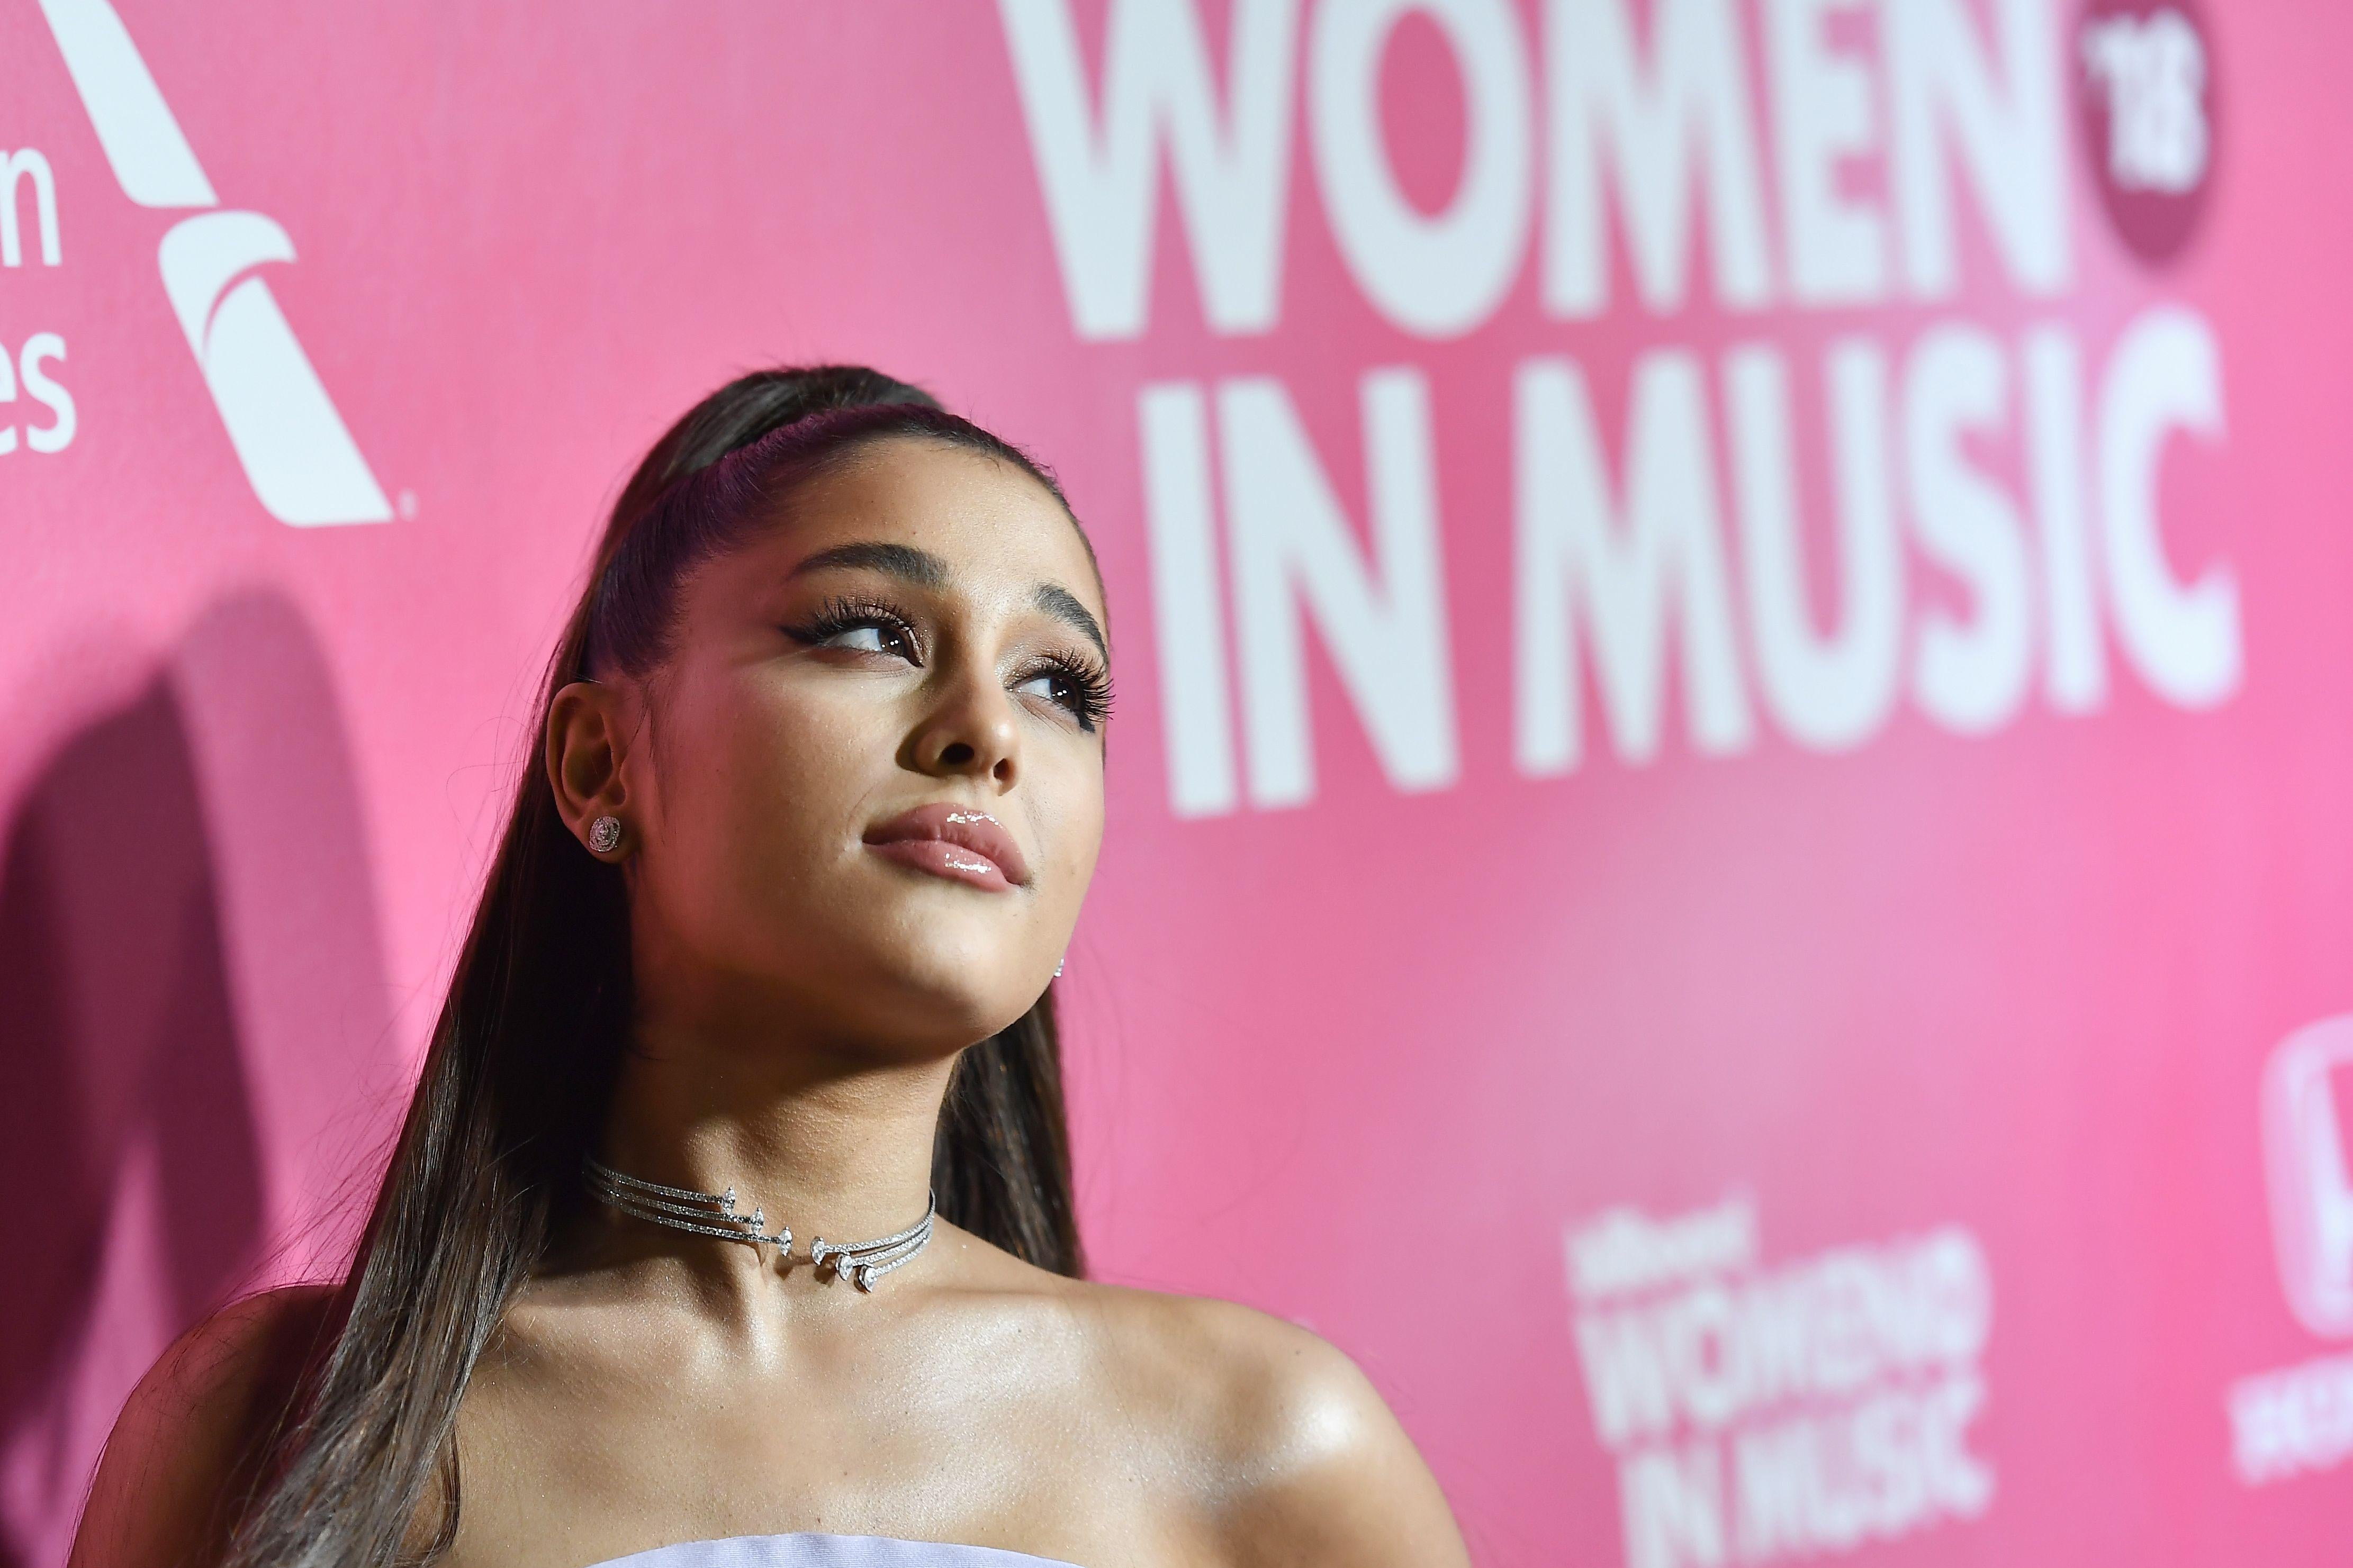 Ariana Grande stands in front of a pink background that says "Women in Music."